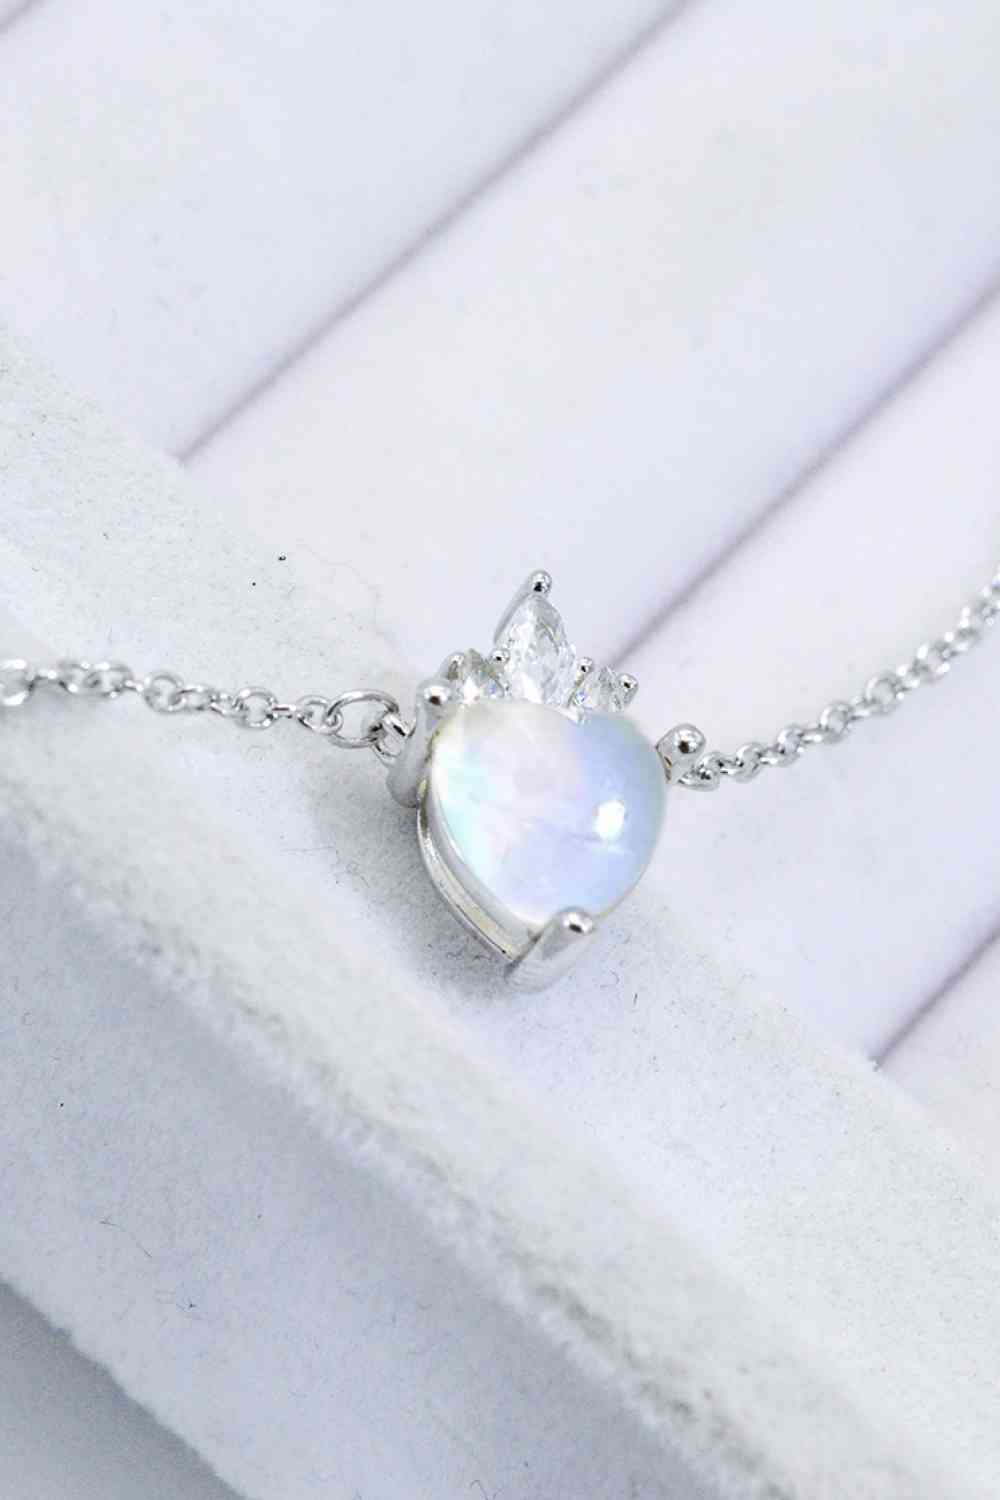 925 Sterling Silver Moonstone Heart Pendant Necklace